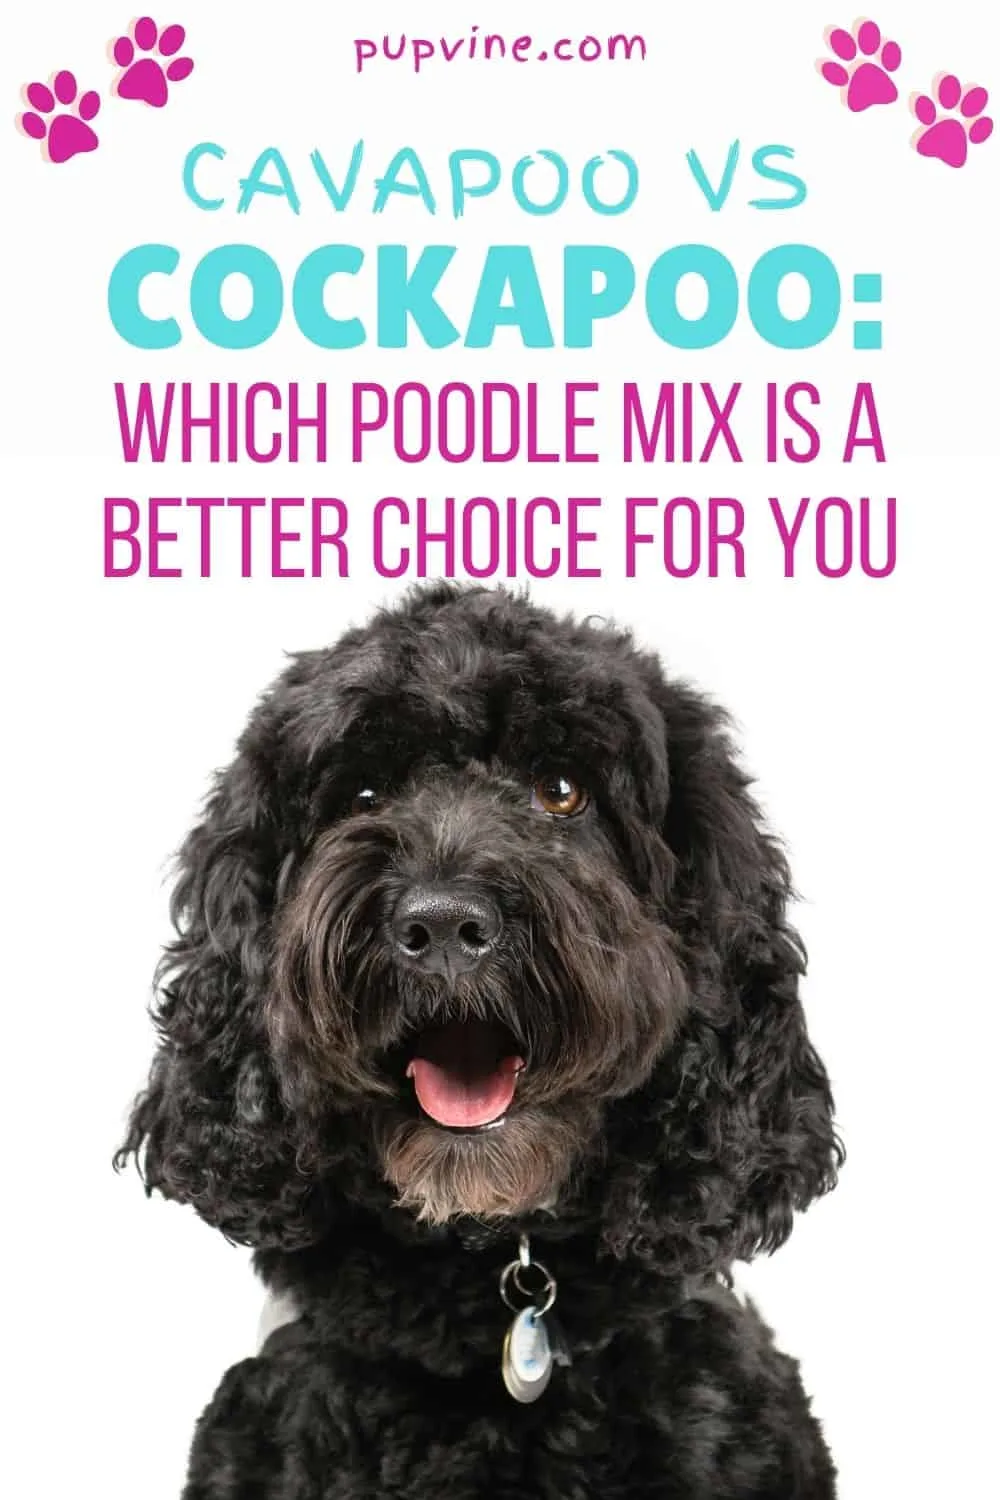 Cavapoo vs Cockapoo: Which Poodle Mix is a Better Choice For You